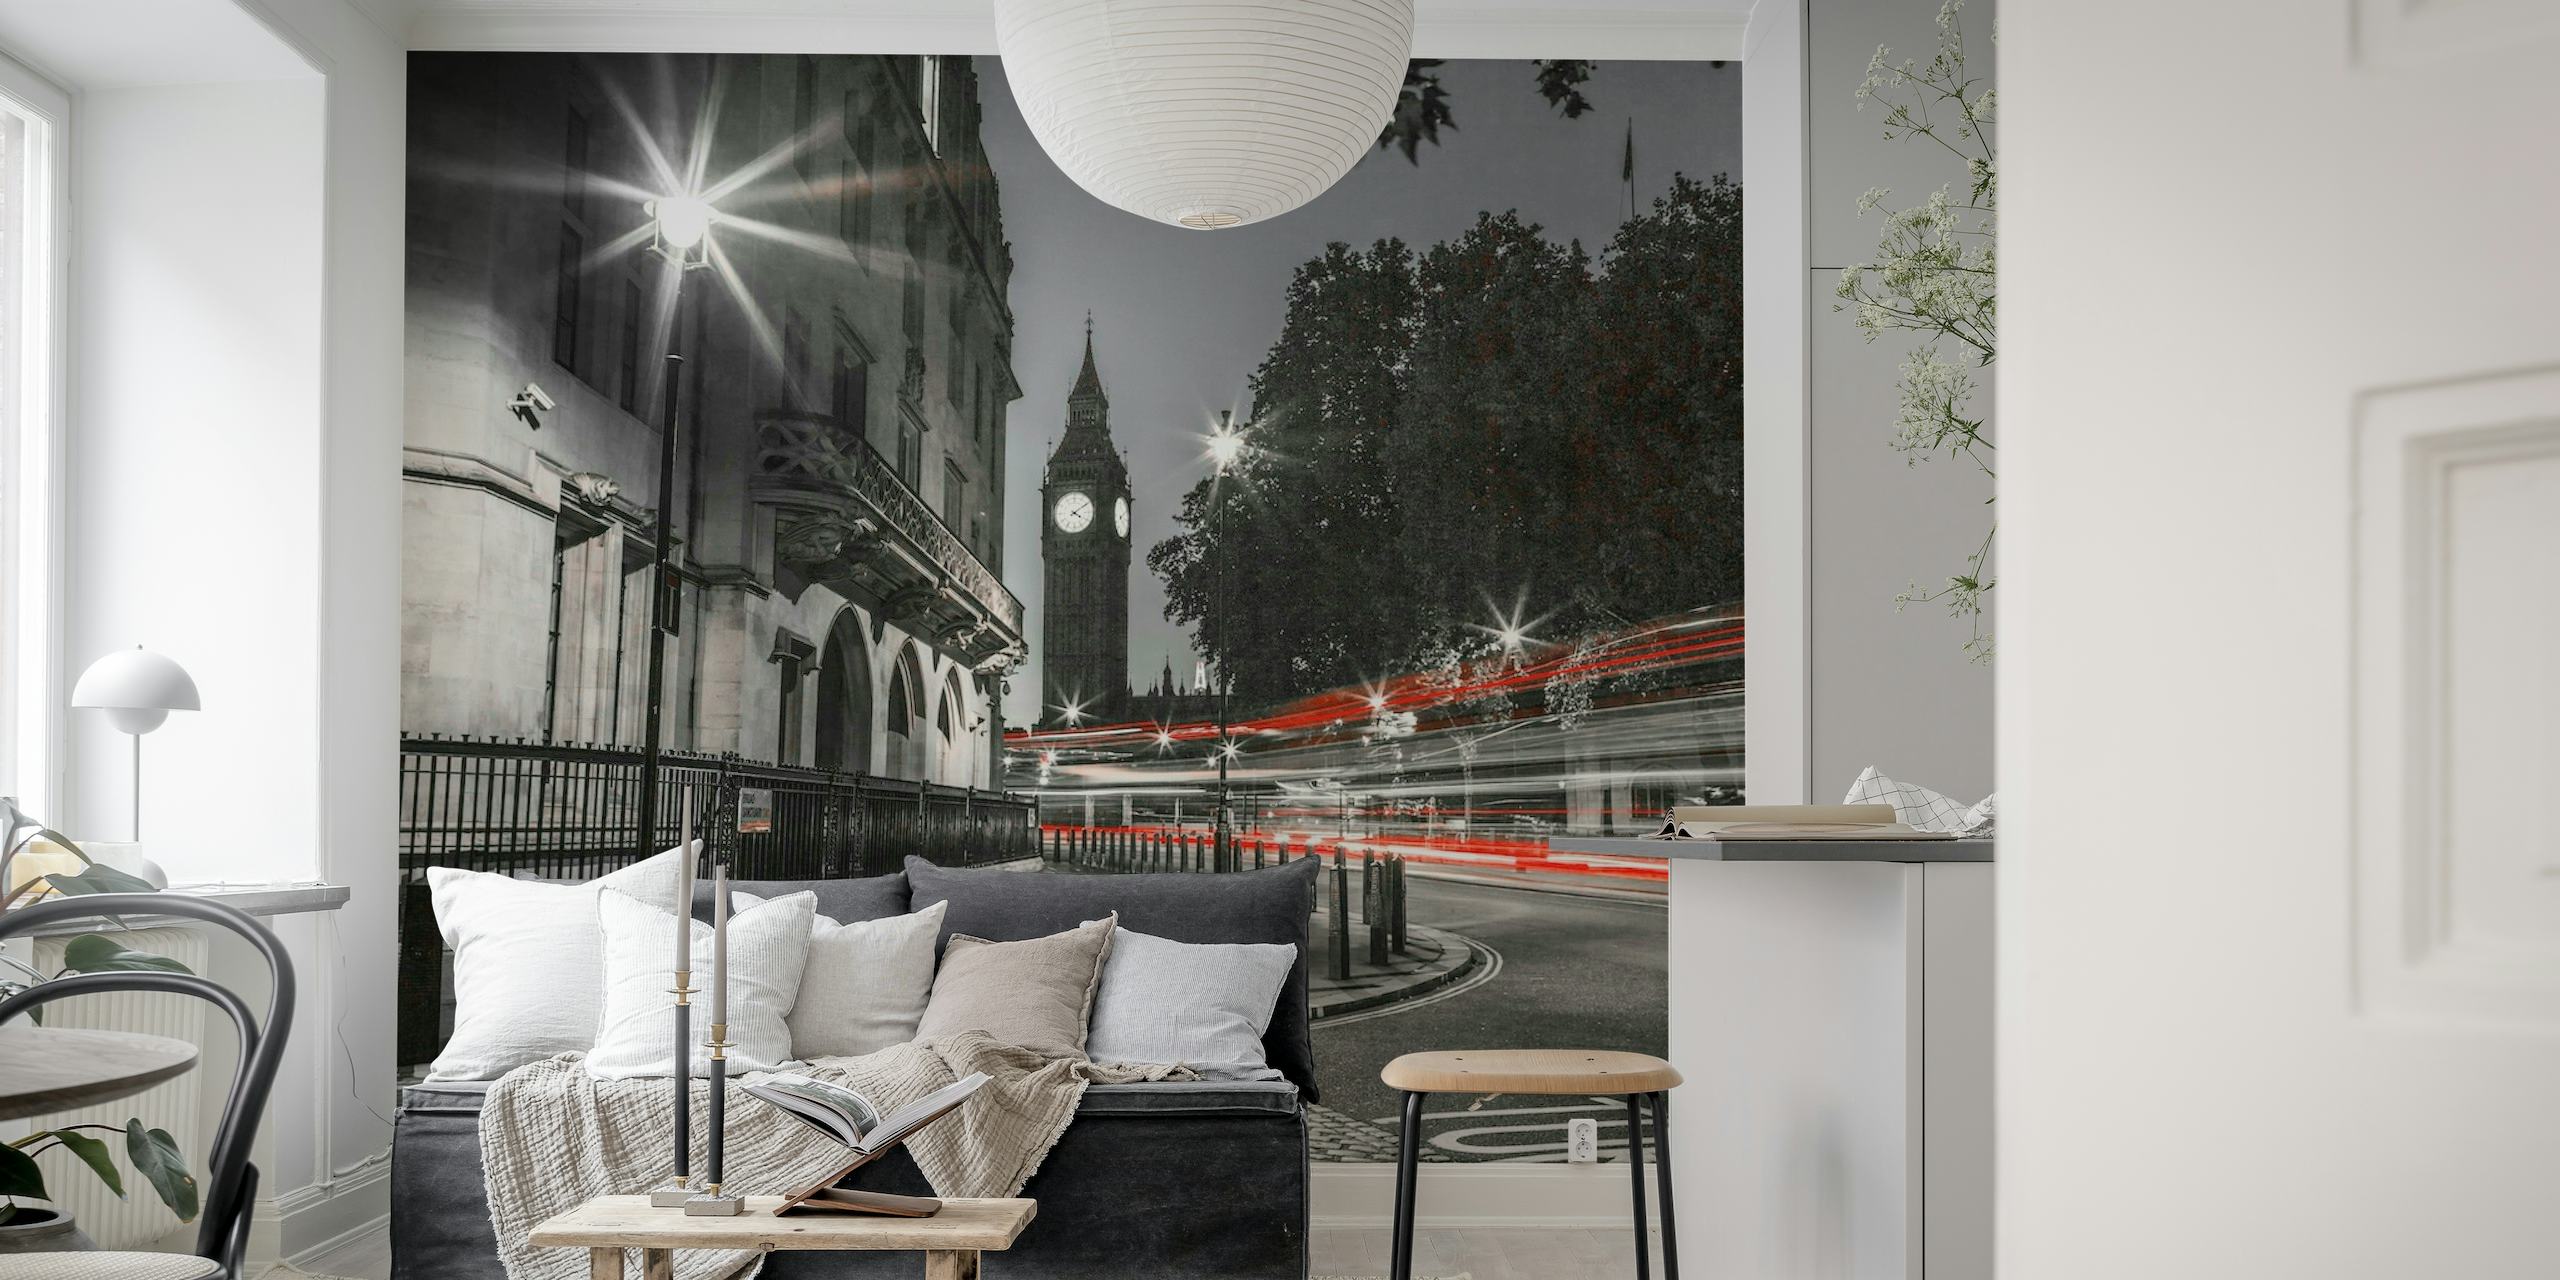 Black and white wall mural of Big Ben with red double-decker bus lights in motion at night in London.